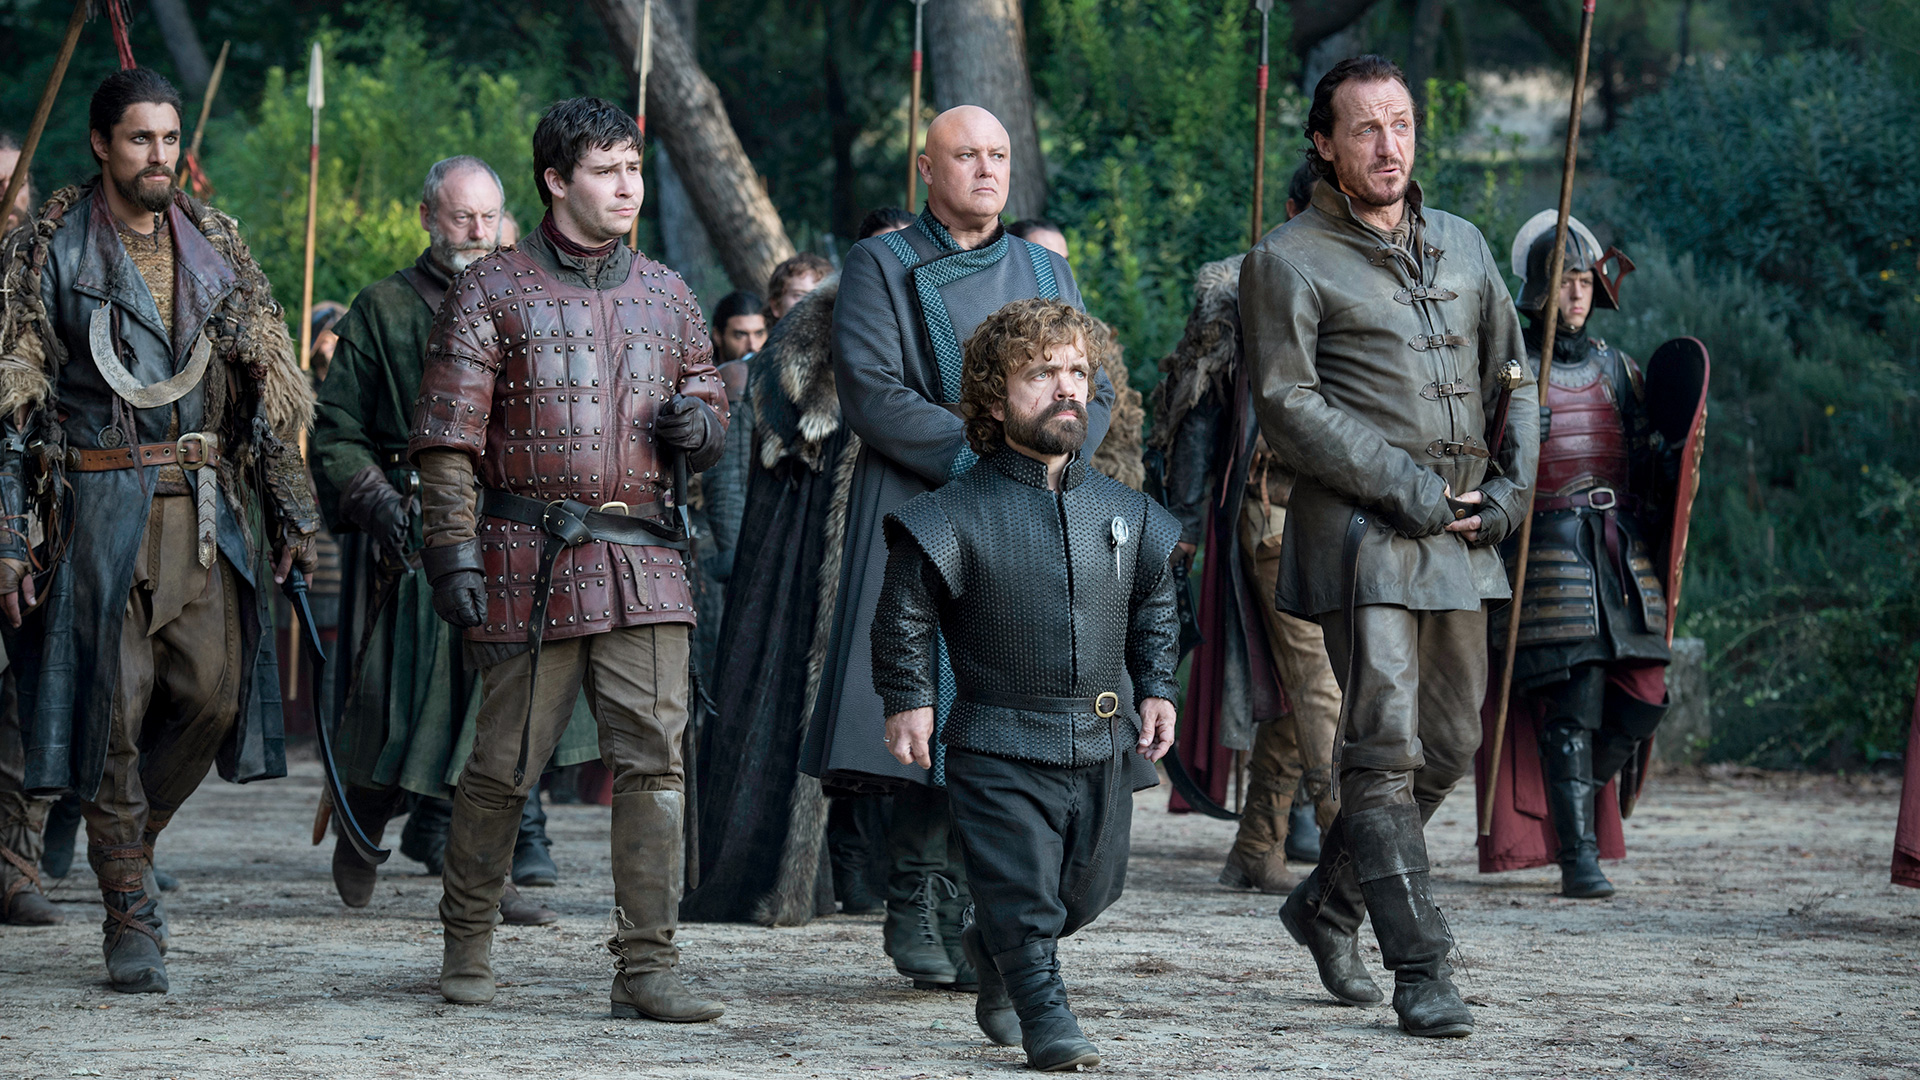 Spoilers: one of these characters is returning to the Dragonpit